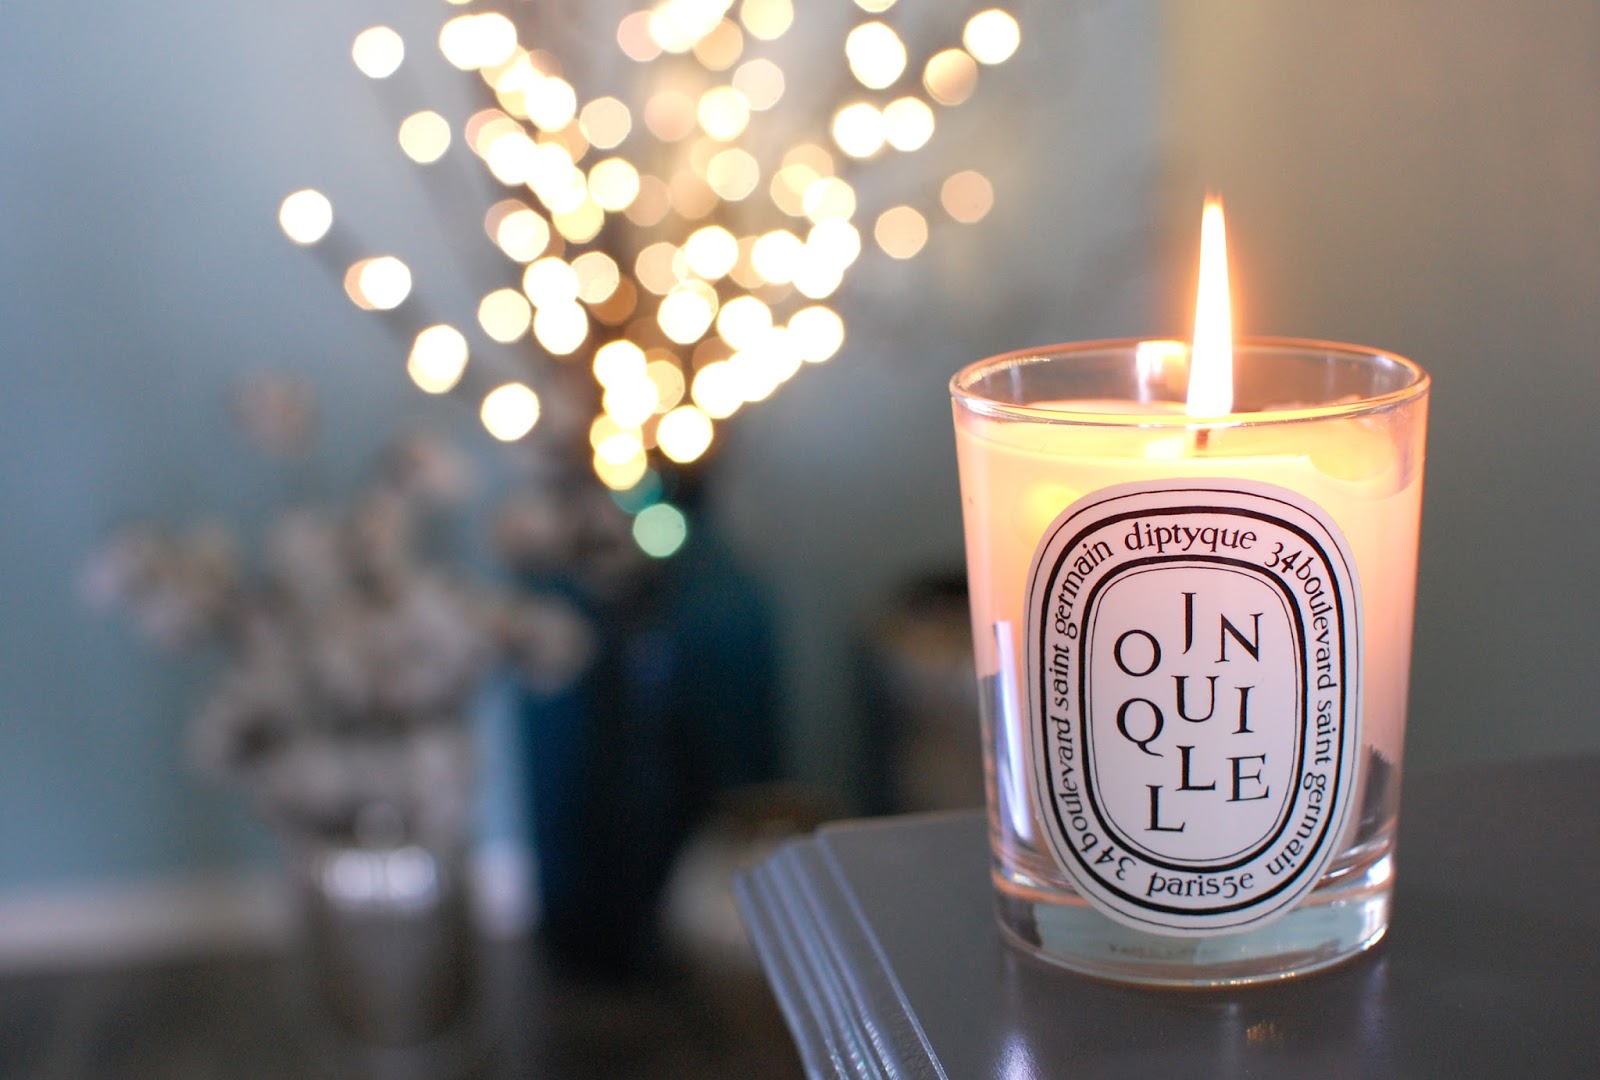 the-redolent-mermaid-diptyque-jonquille-candle